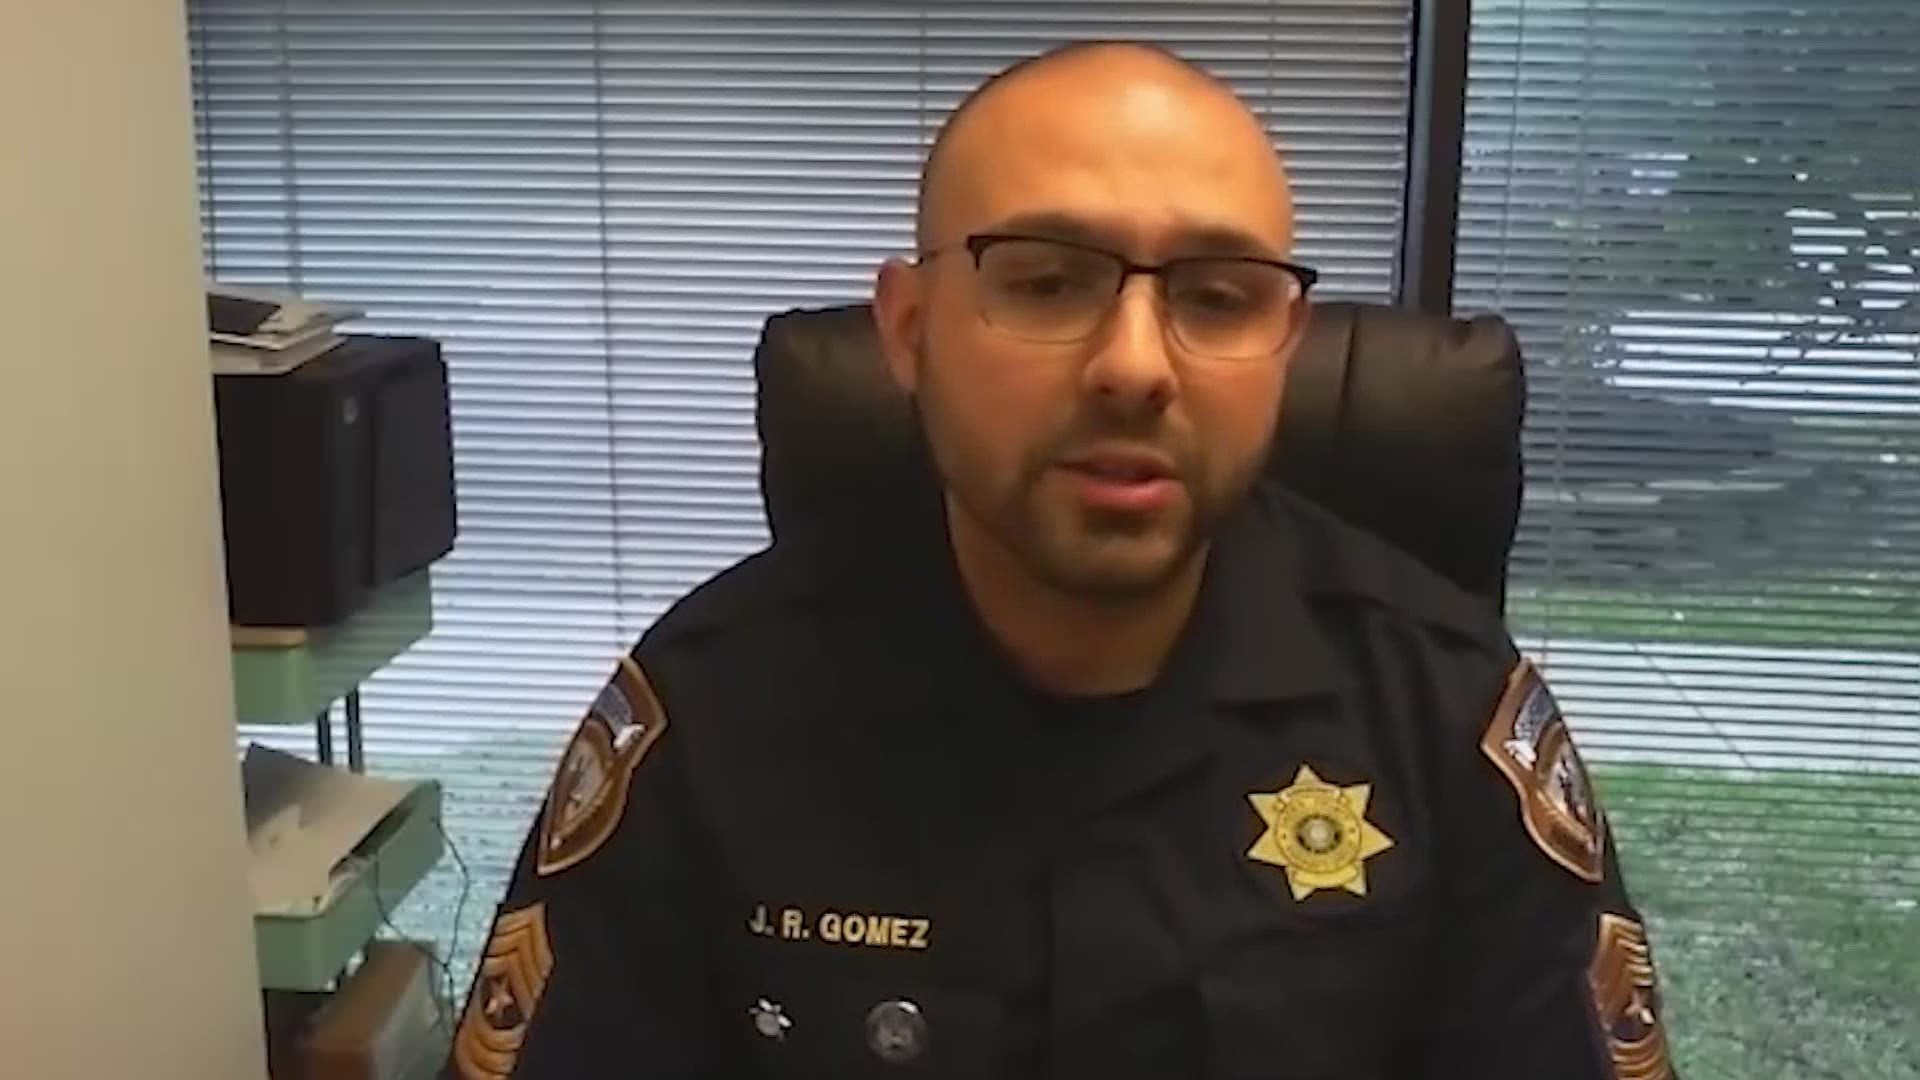 Sheriff Gonzalez's telepsychiatry program has jumped from 3 deputies to nearly 150 in less than 4 years. But with thousands of 911 calls, more resources are needed.